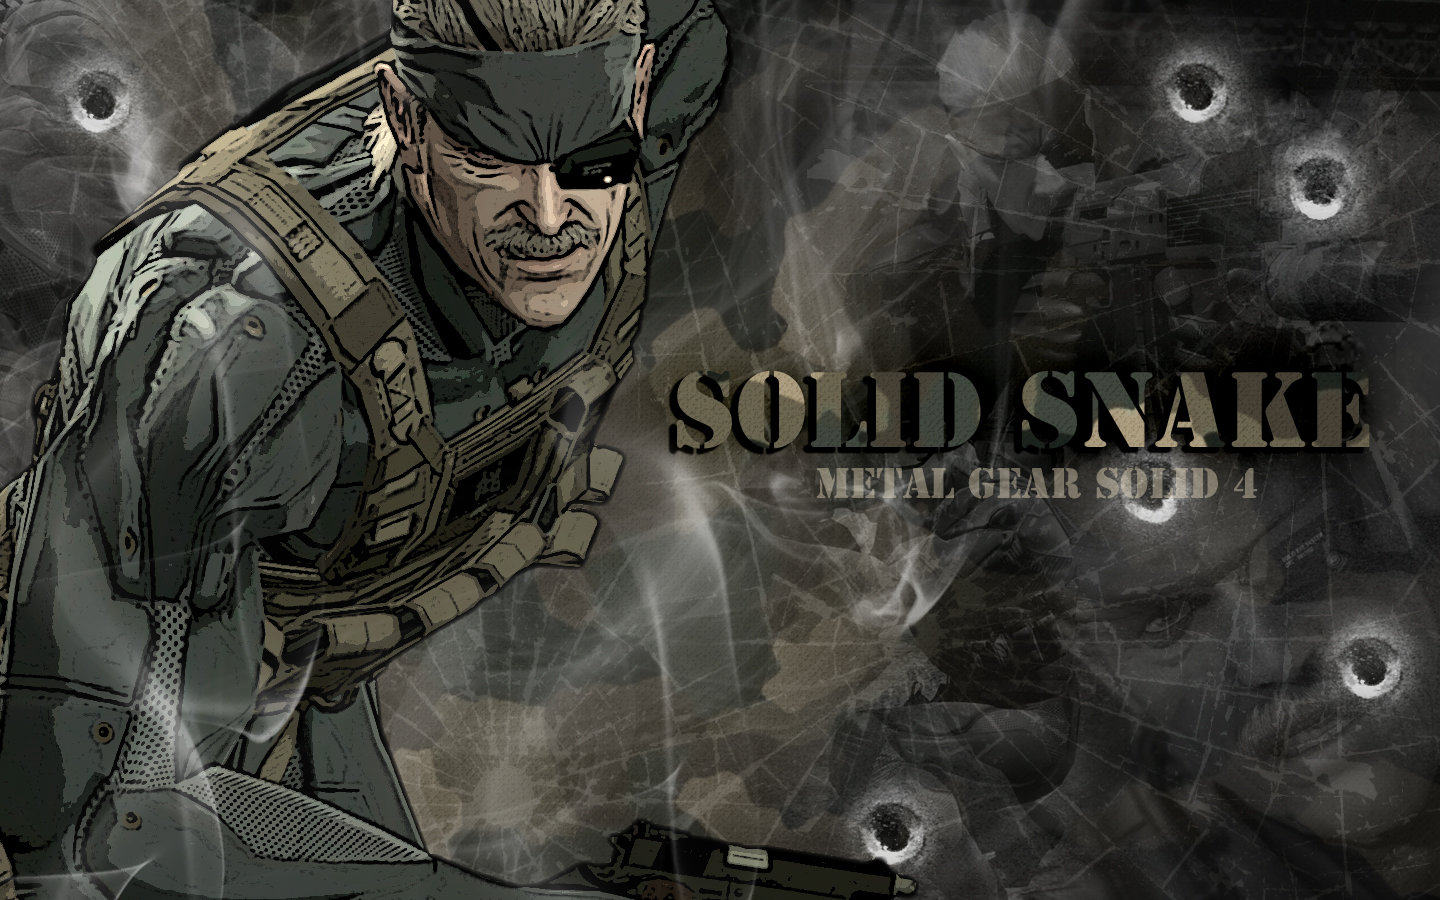 Solid Snake Mgs4 Wallpaper By Hallucination Walker